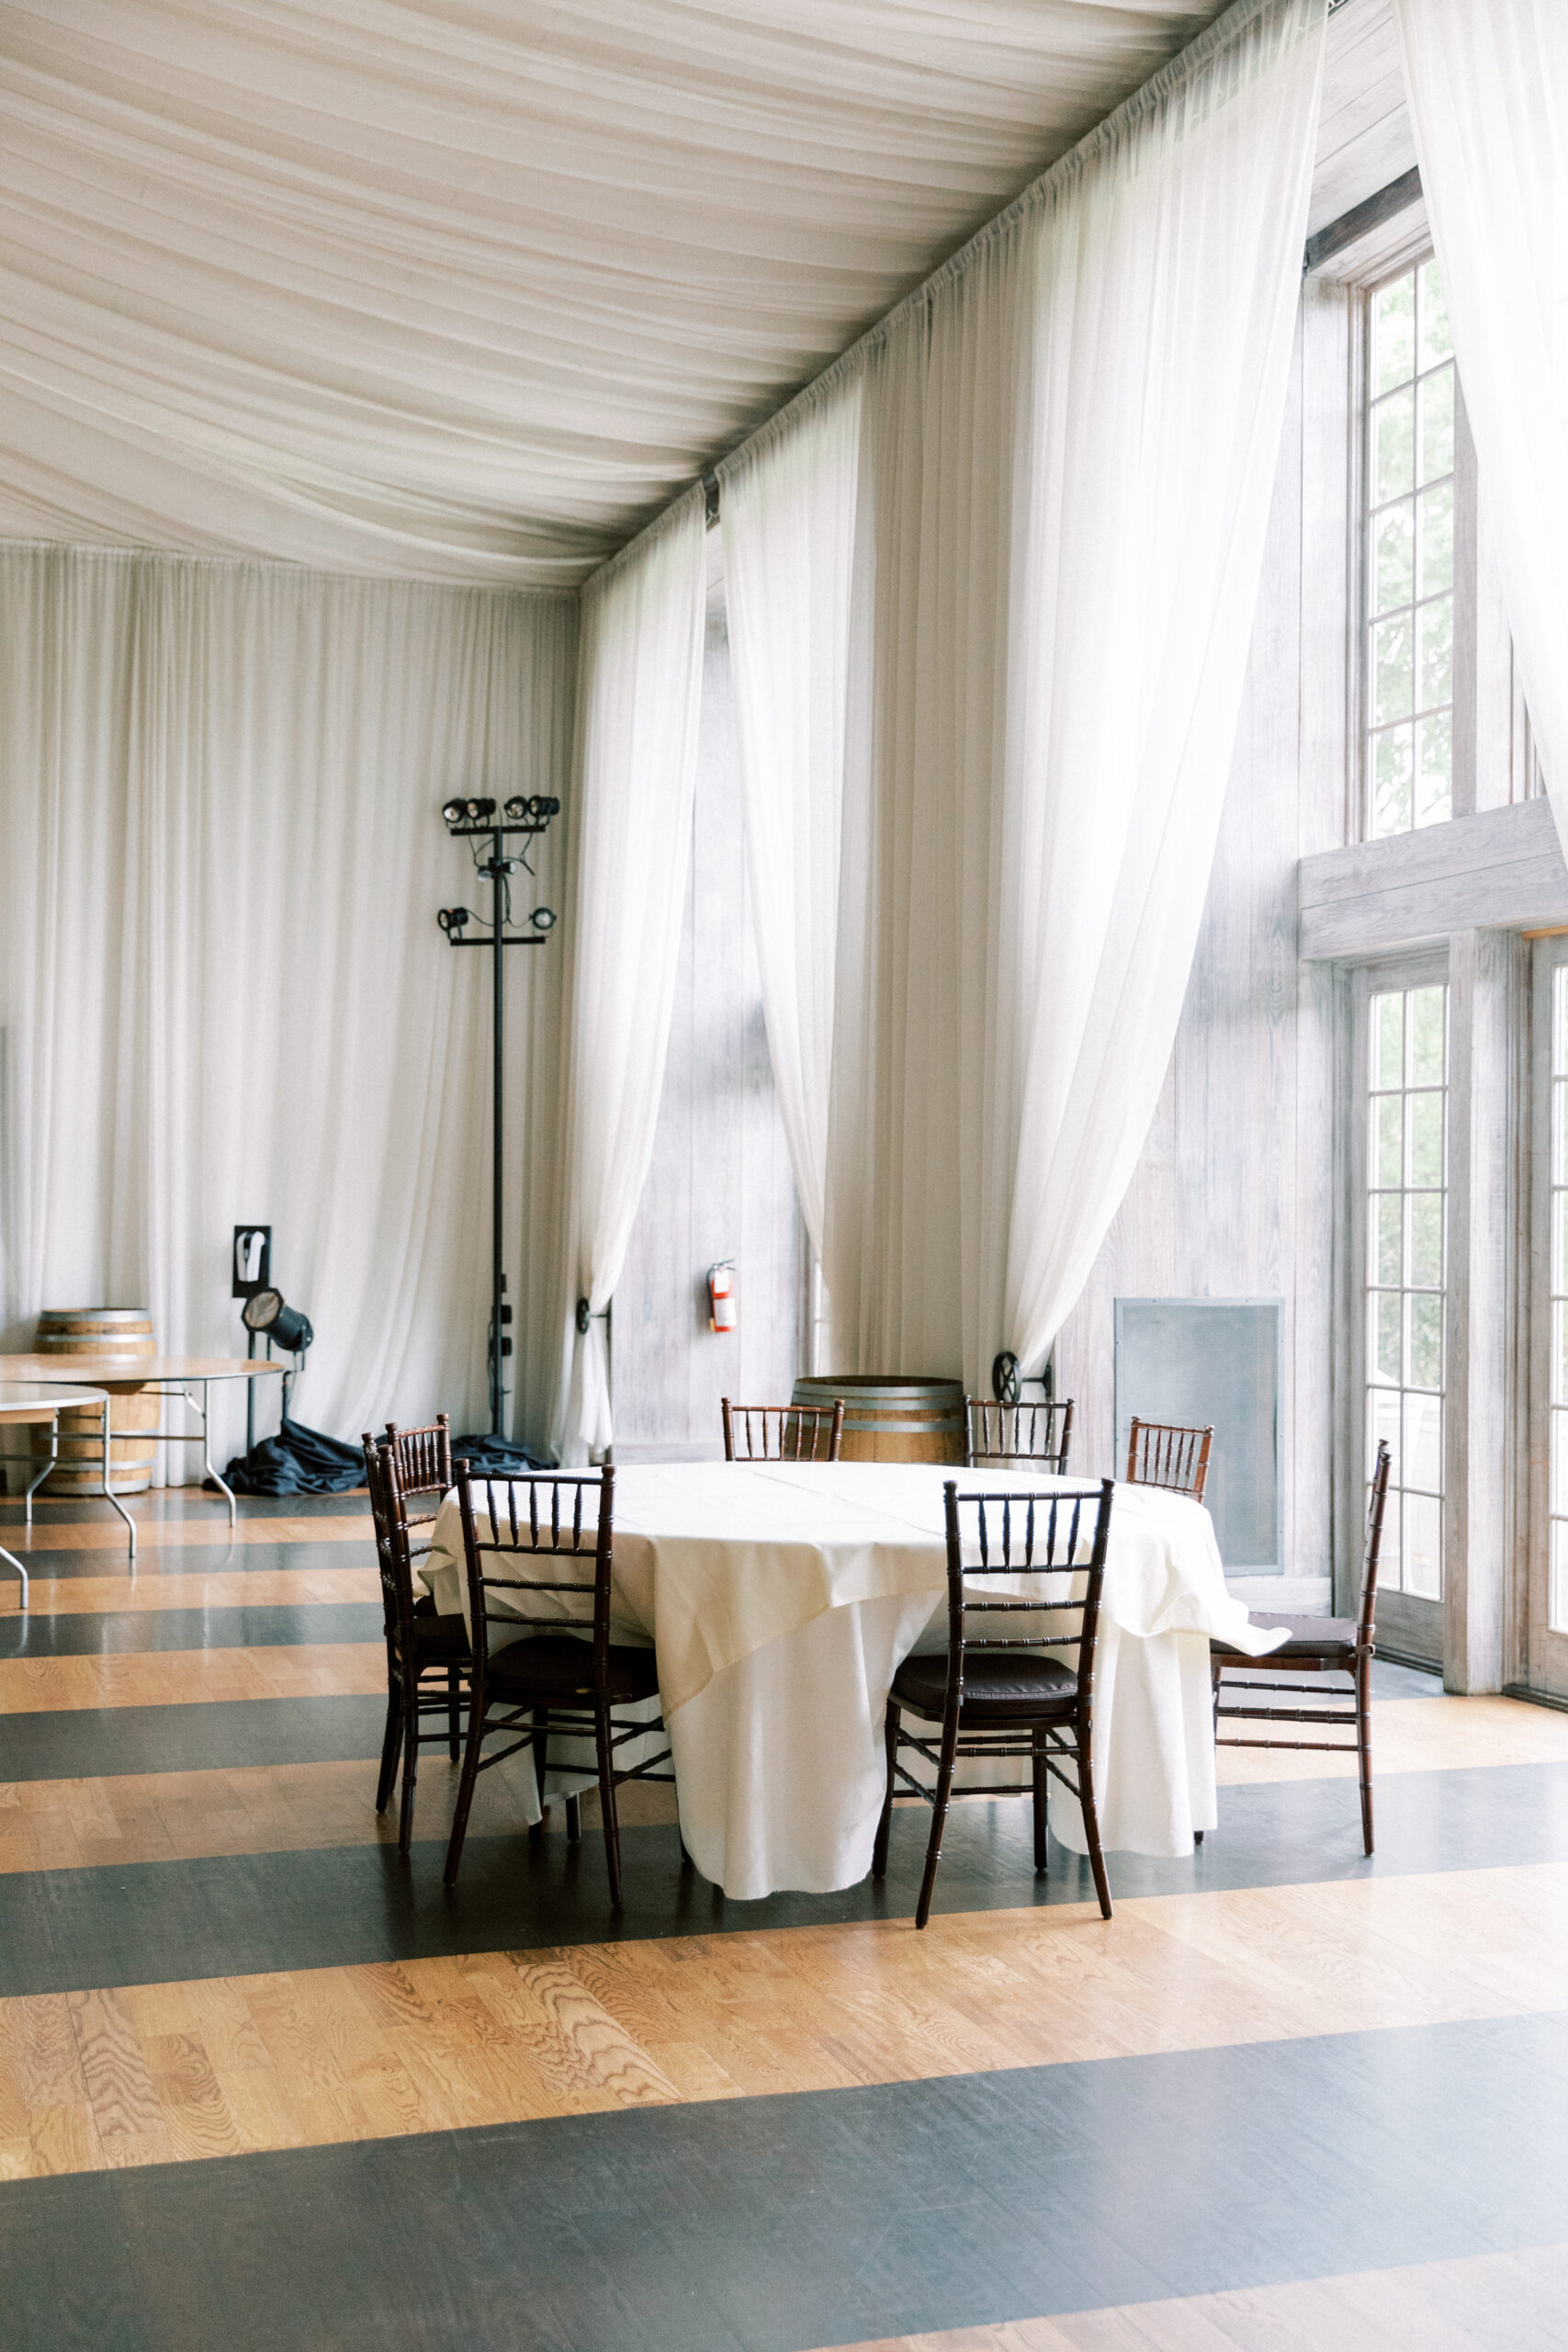 The reception space at Veritas has round tables, chairs and a white curtain